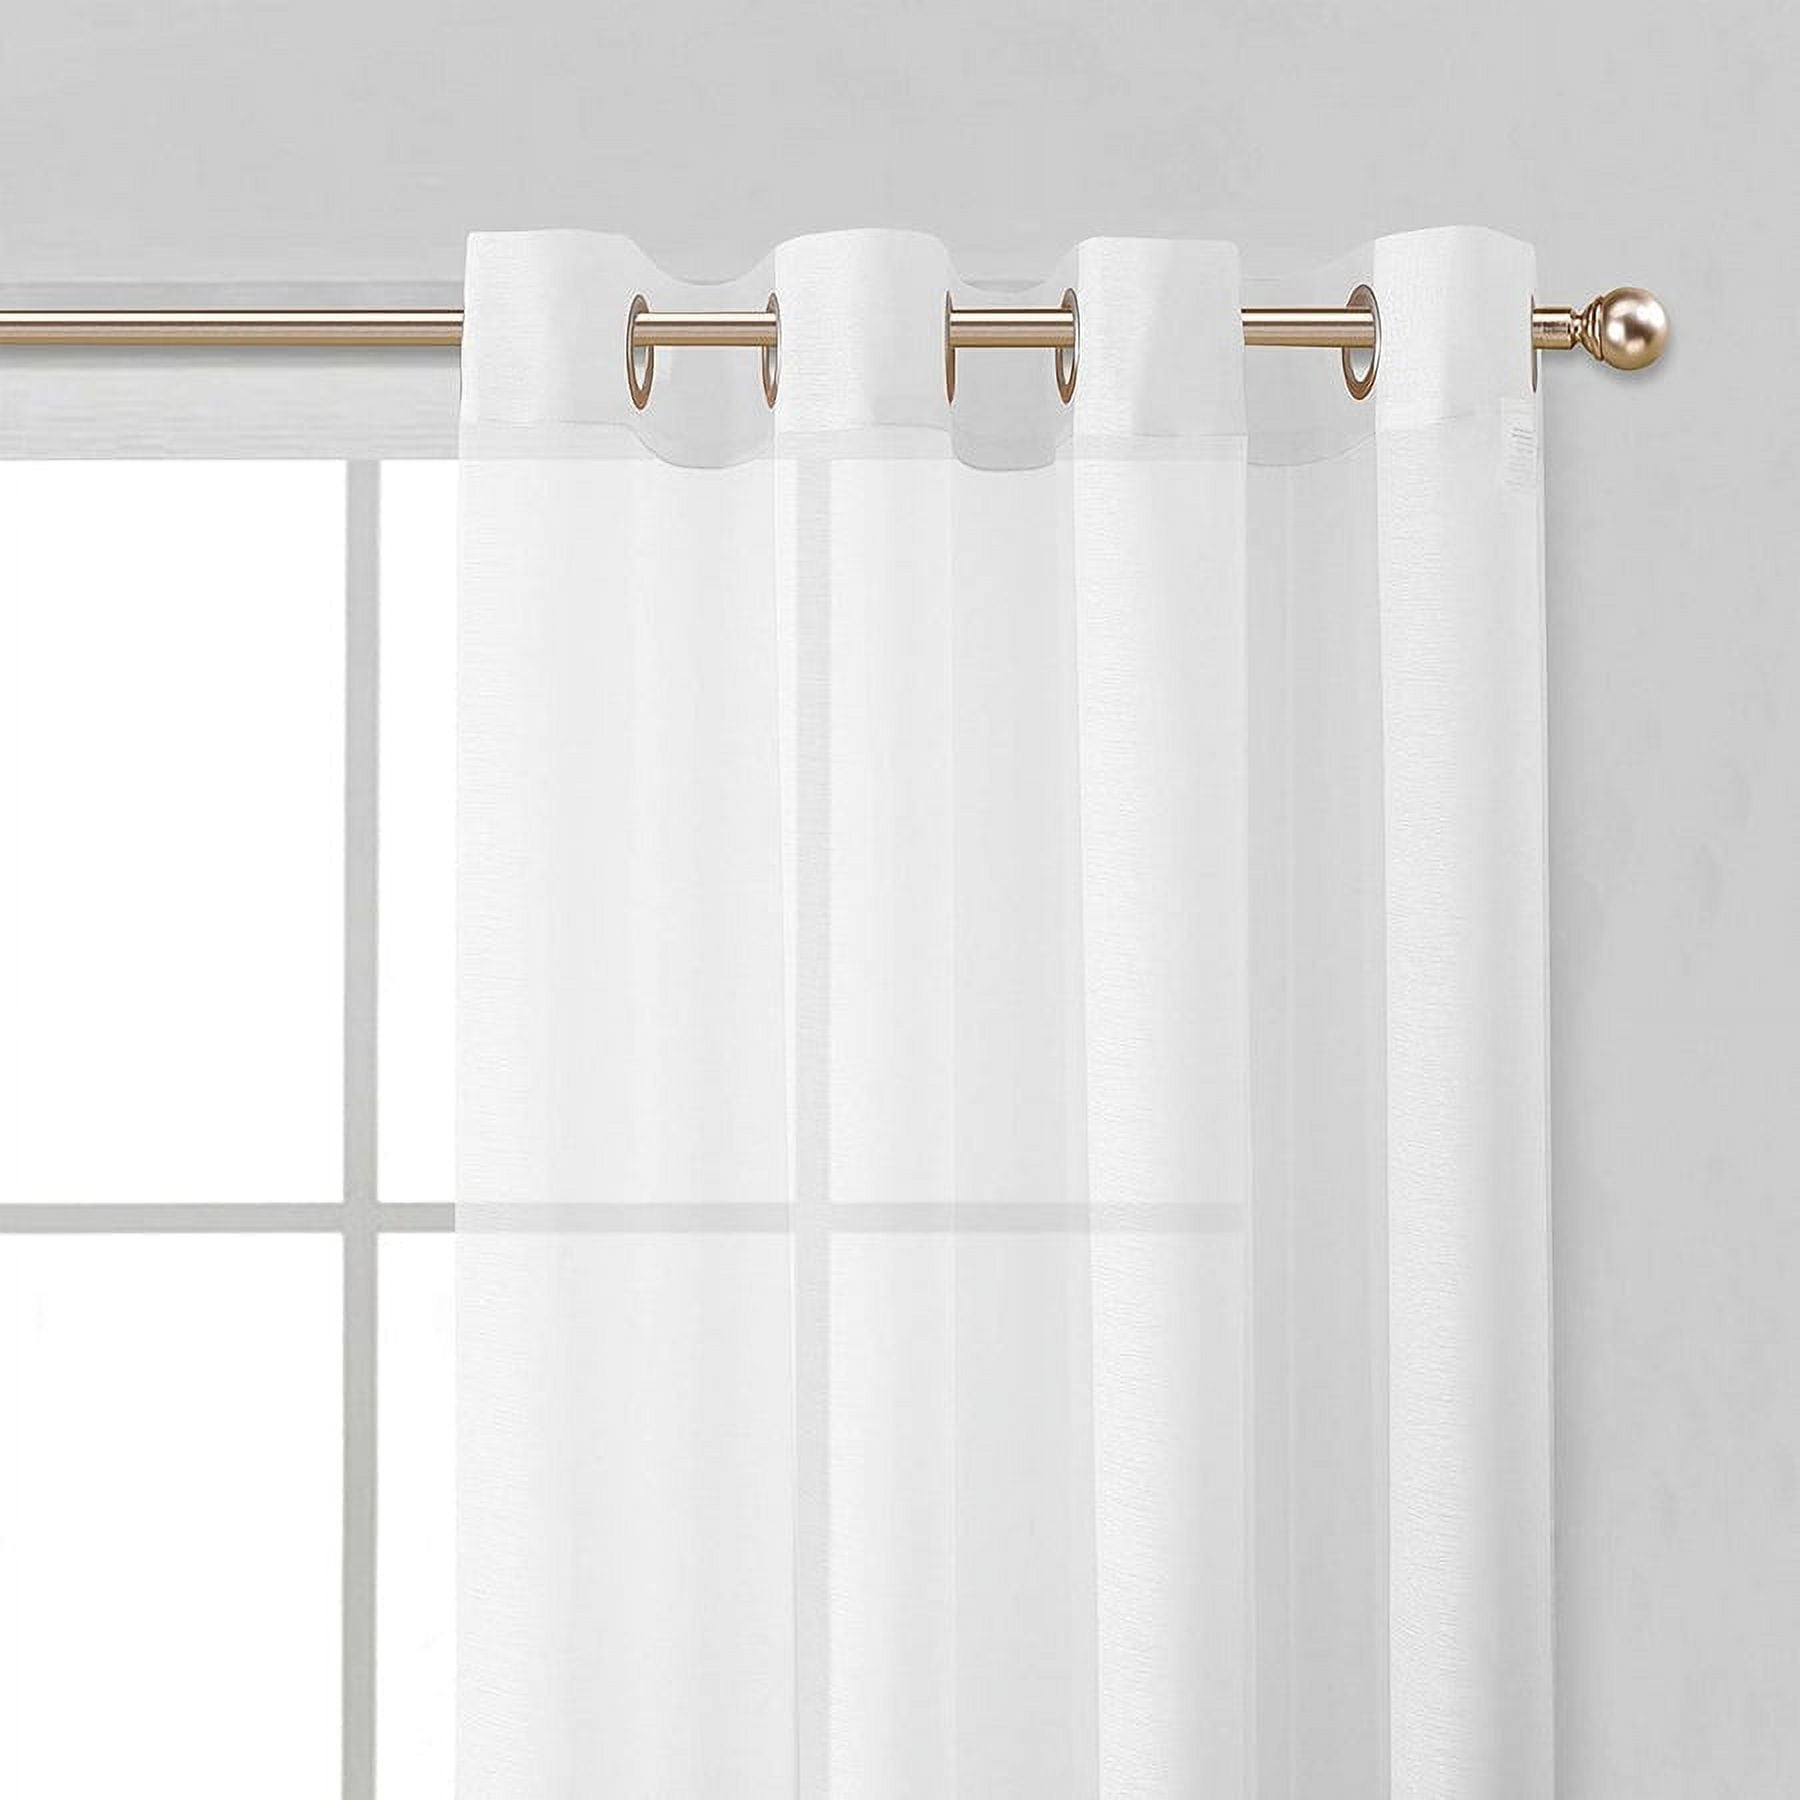 Dainty Home Cloud Linen Look 3D Puff Linen Look Sheer Curtain Panel Grommet  Panel Pair 2 Curtain Panels W38 x L84 inches in Gray CLOUD7684GR - The  Home Depot